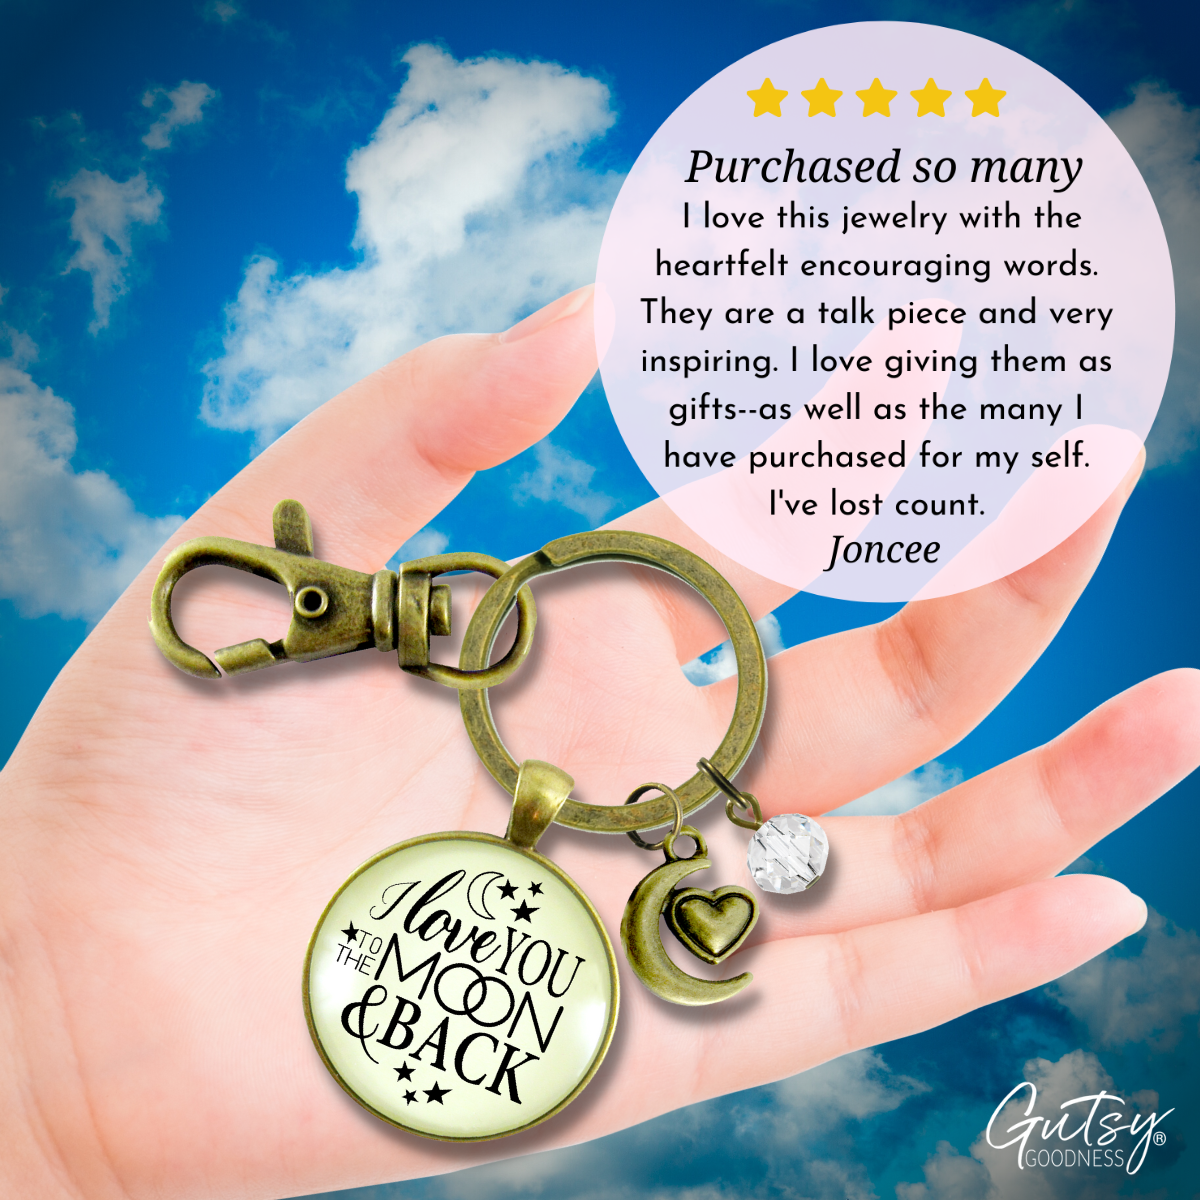 I Love You To The Moon and Back Keychain Inspirational Jewelry Half Moon Heart Charm - Gutsy Goodness Handmade Jewelry;I Love You To The Moon And Back Keychain Inspirational Jewelry Half Moon Heart Charm - Gutsy Goodness Handmade Jewelry Gifts